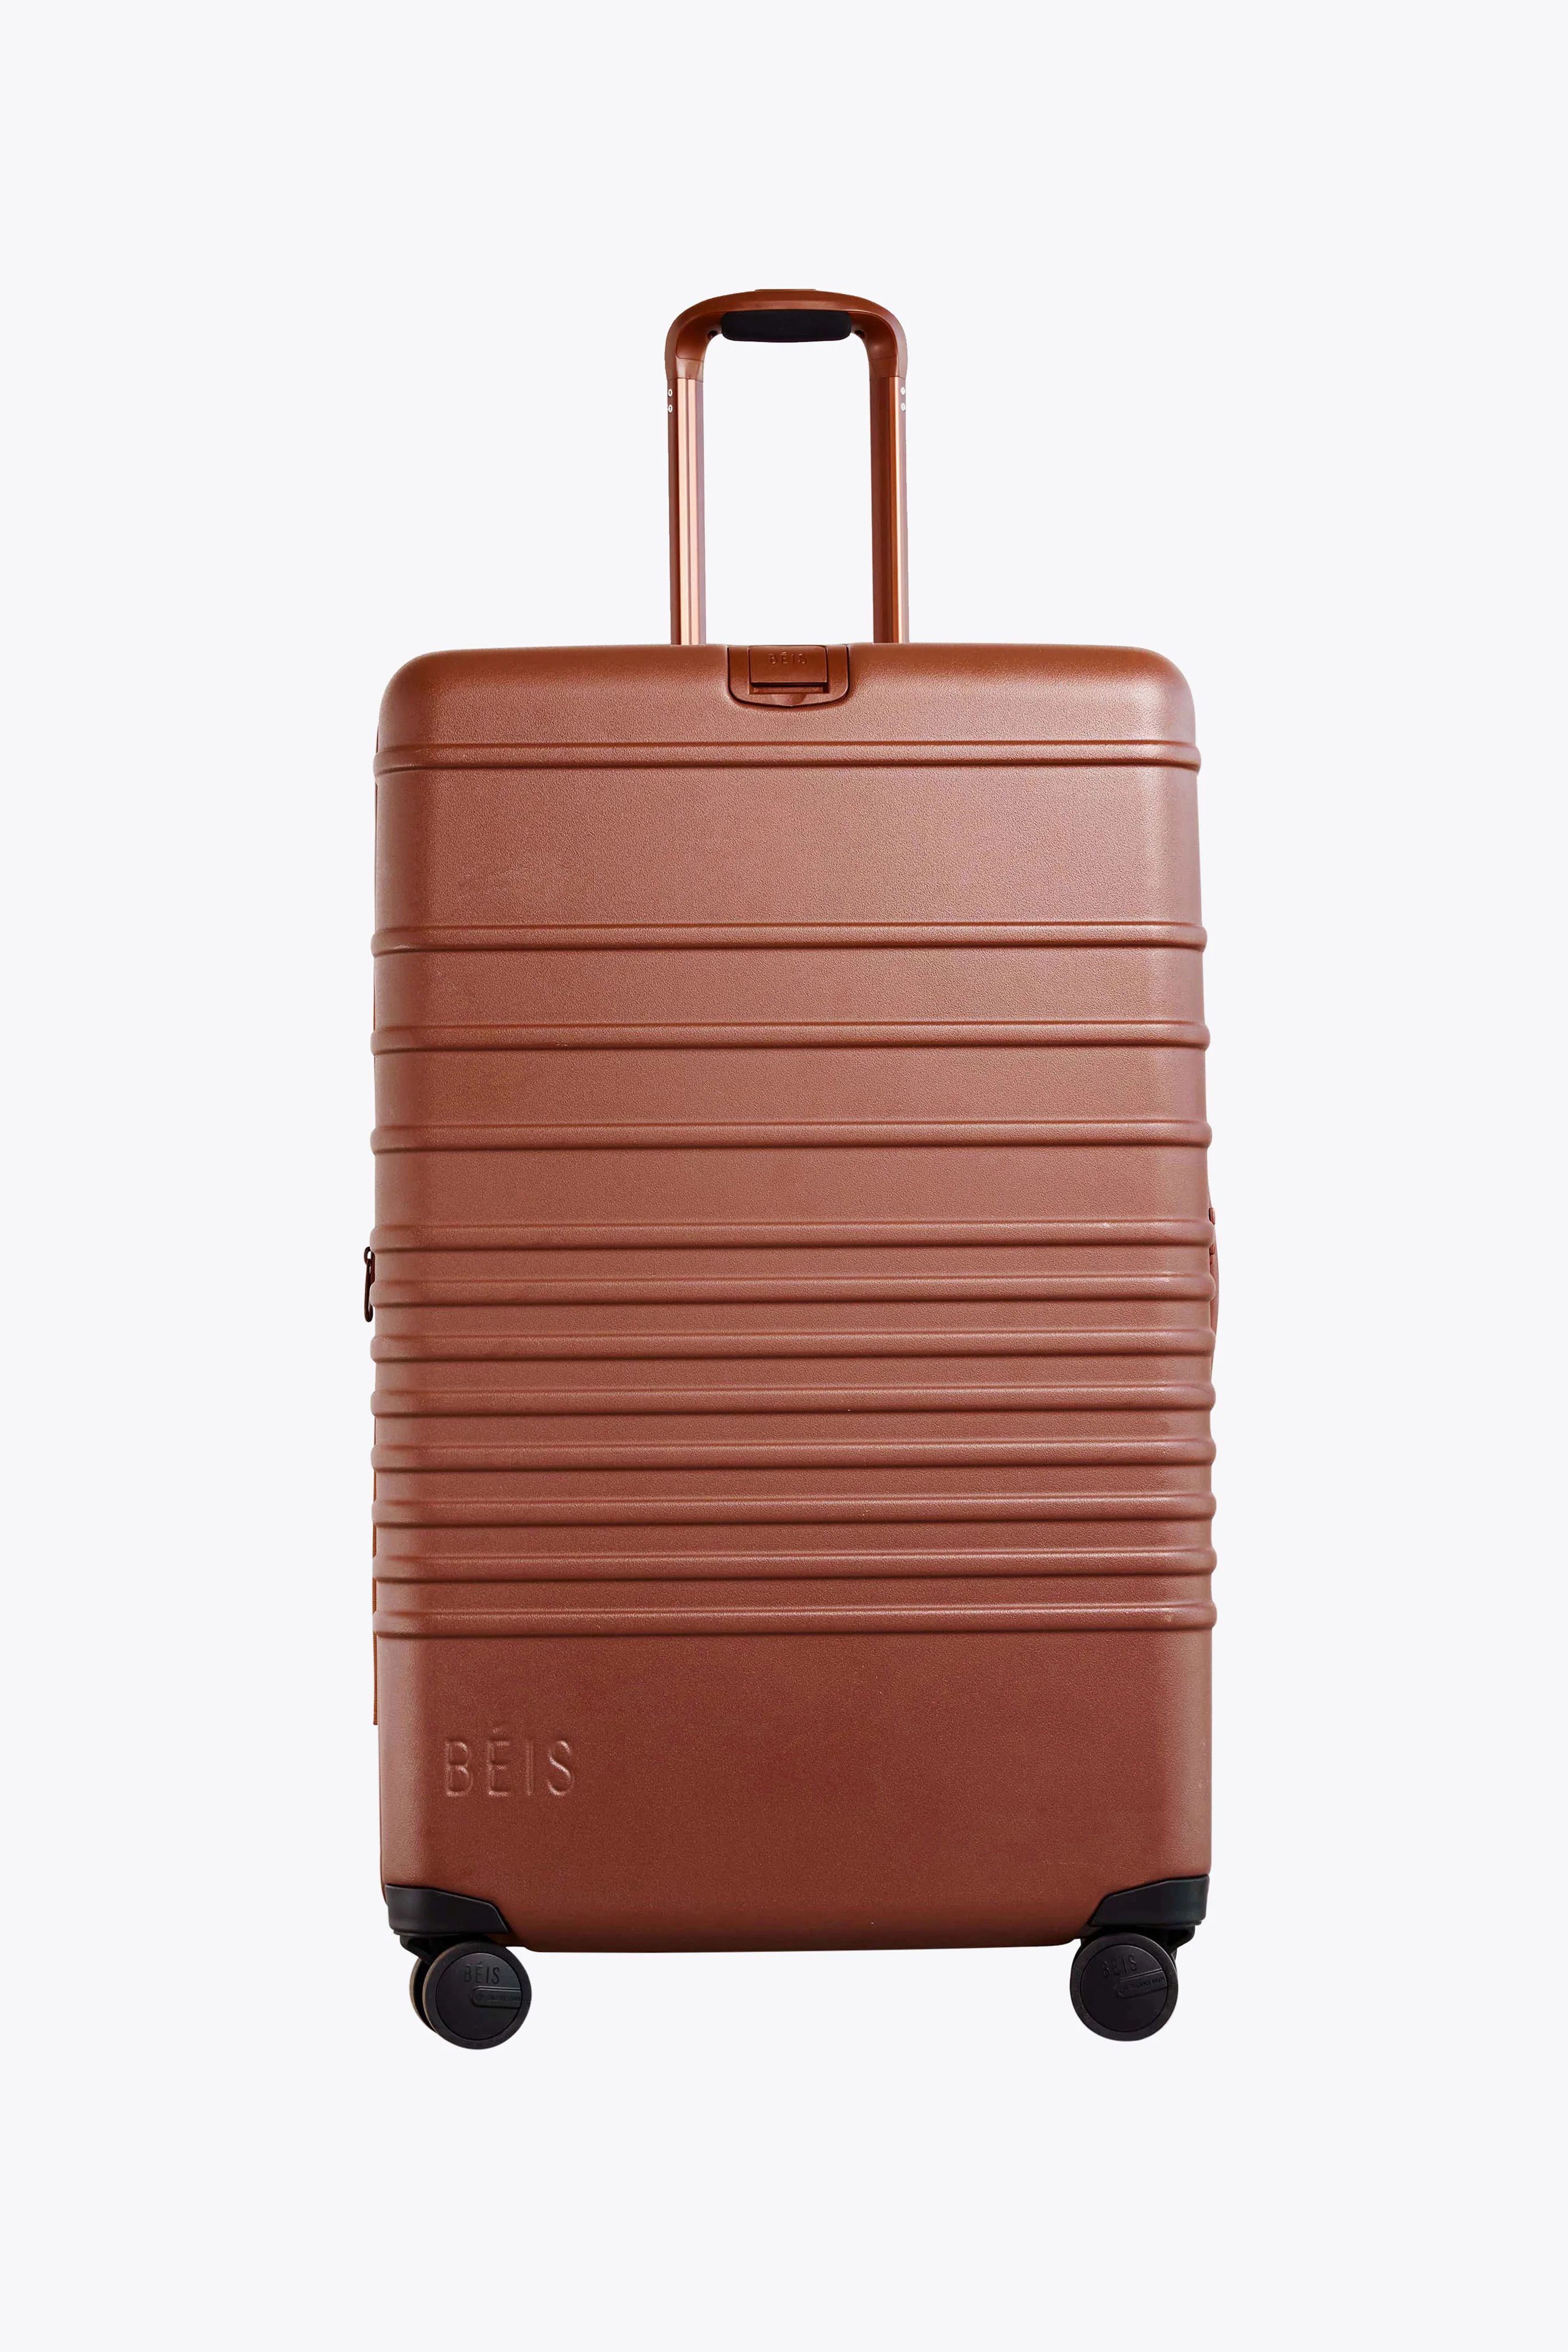 The Large Check-In Roller in Maple | BÉIS Travel